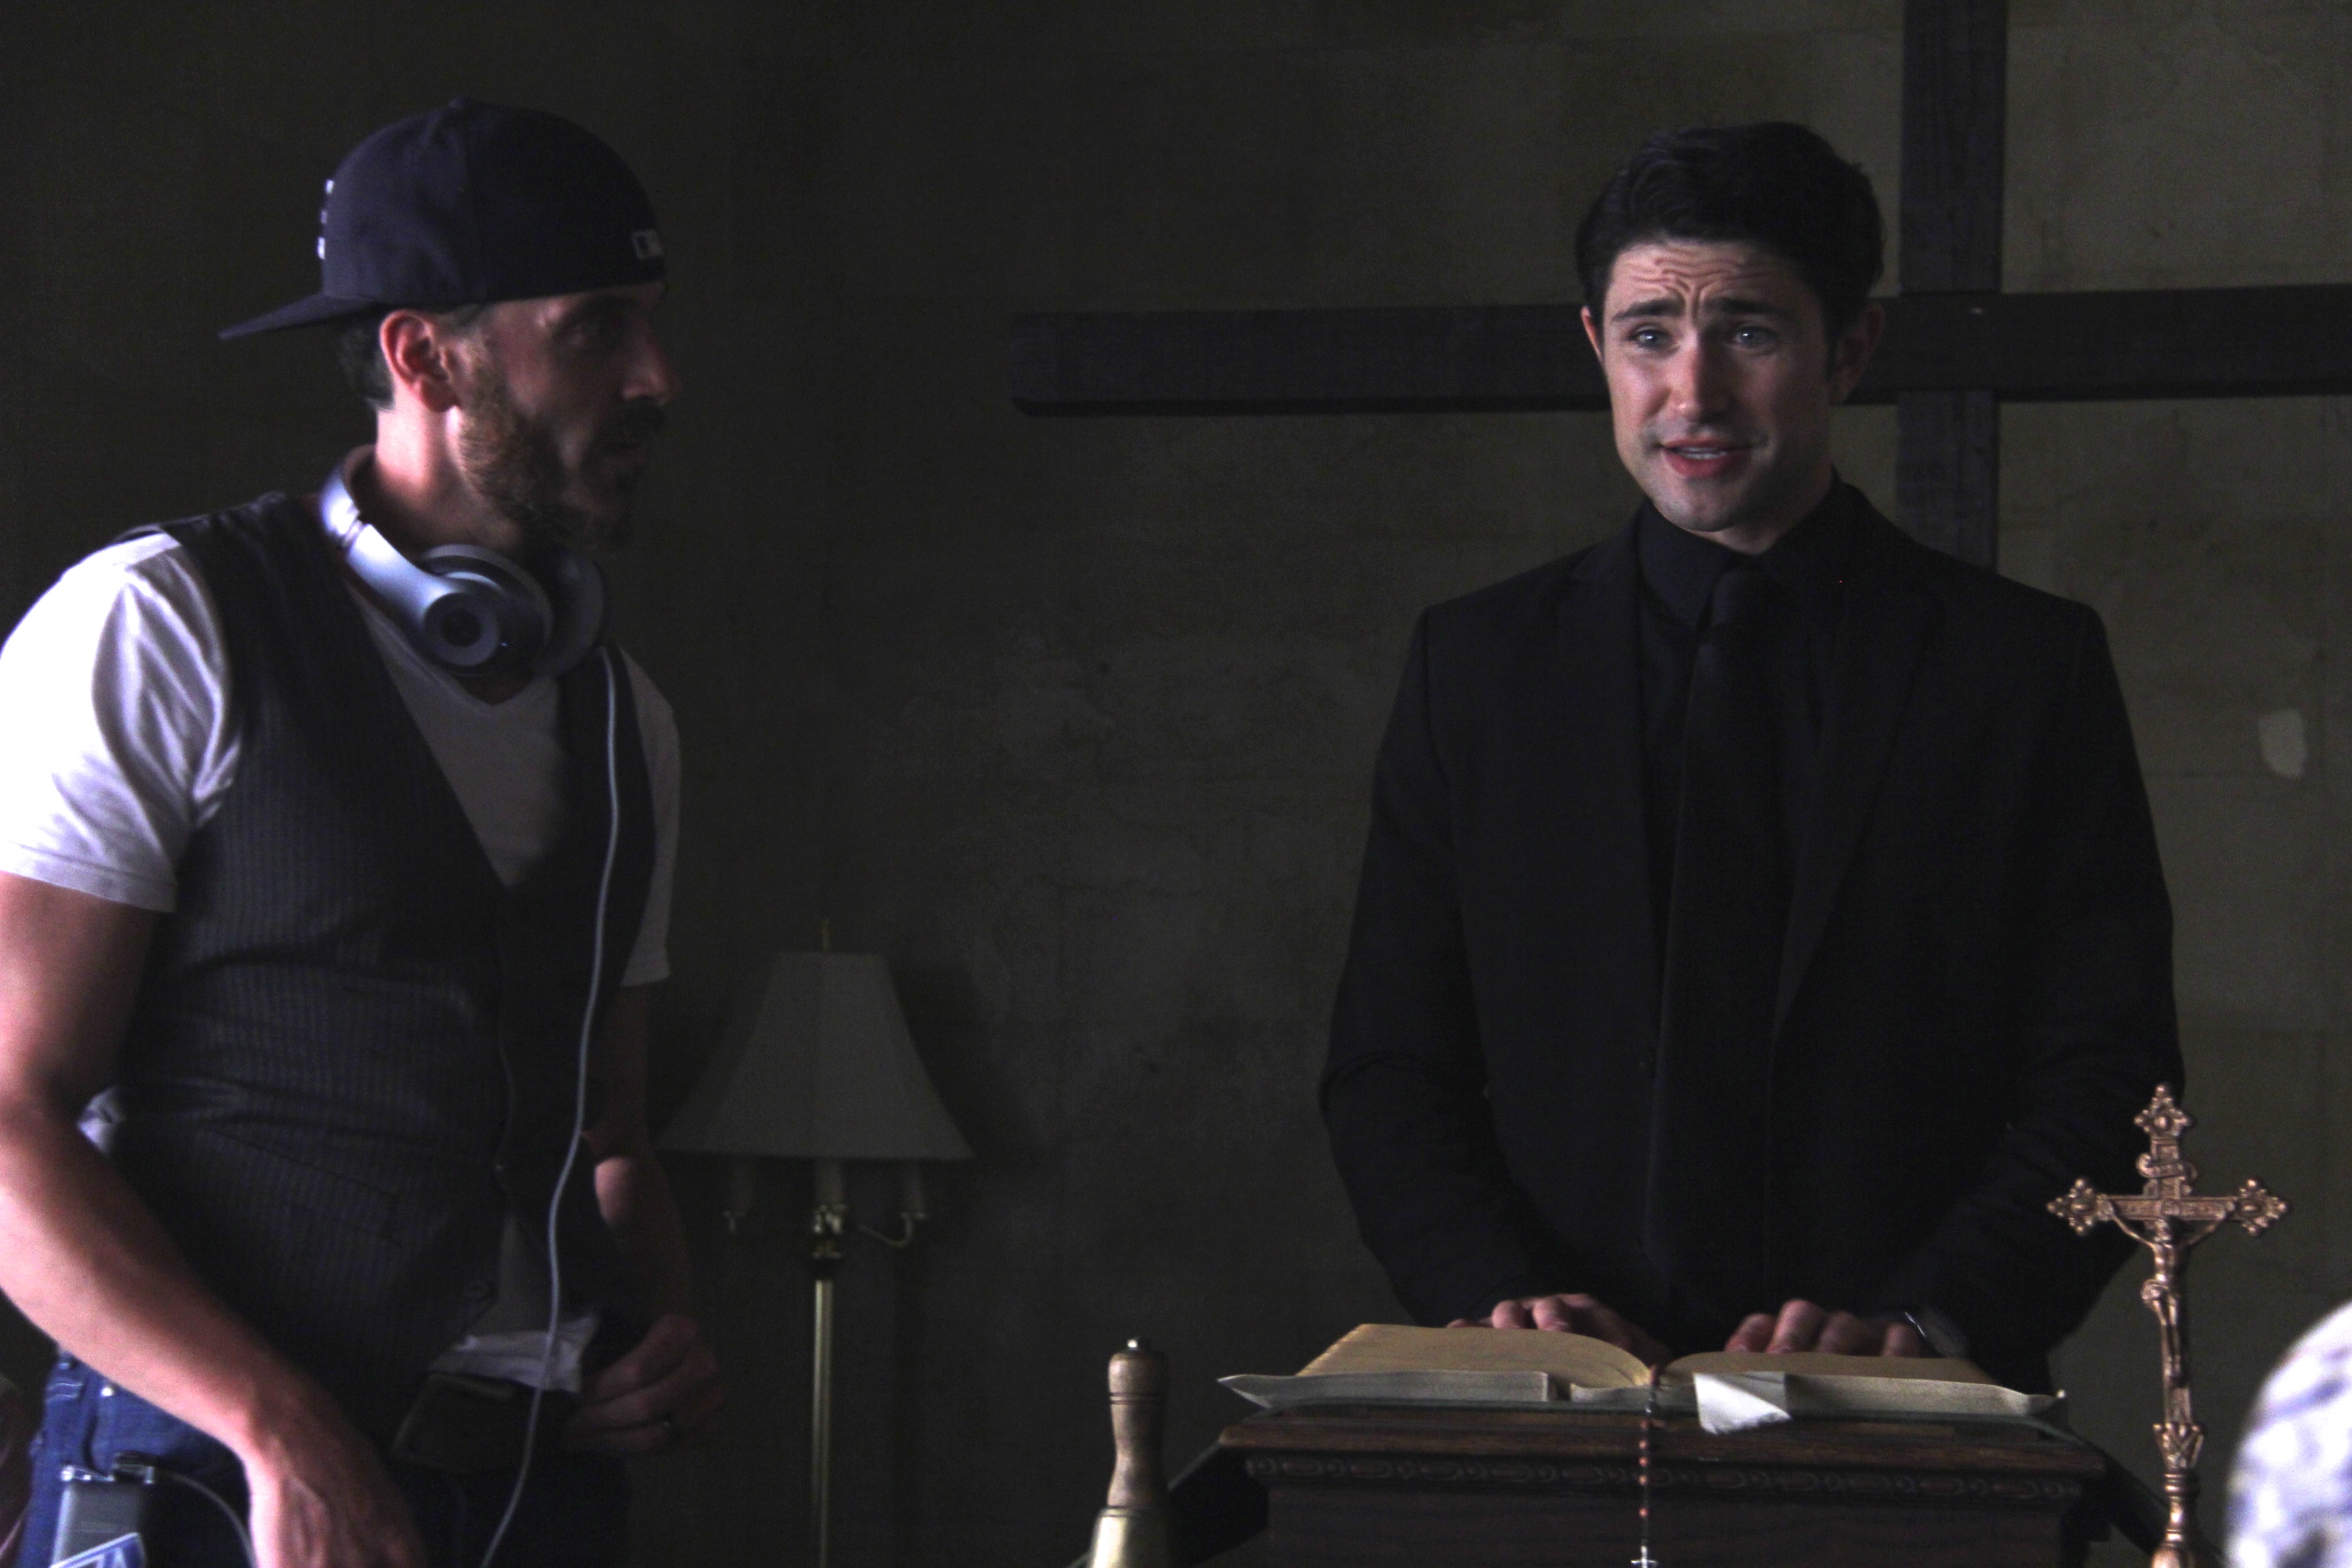 director Jason DeVan with actor Matt Dallas on set of Tell Me Your Name